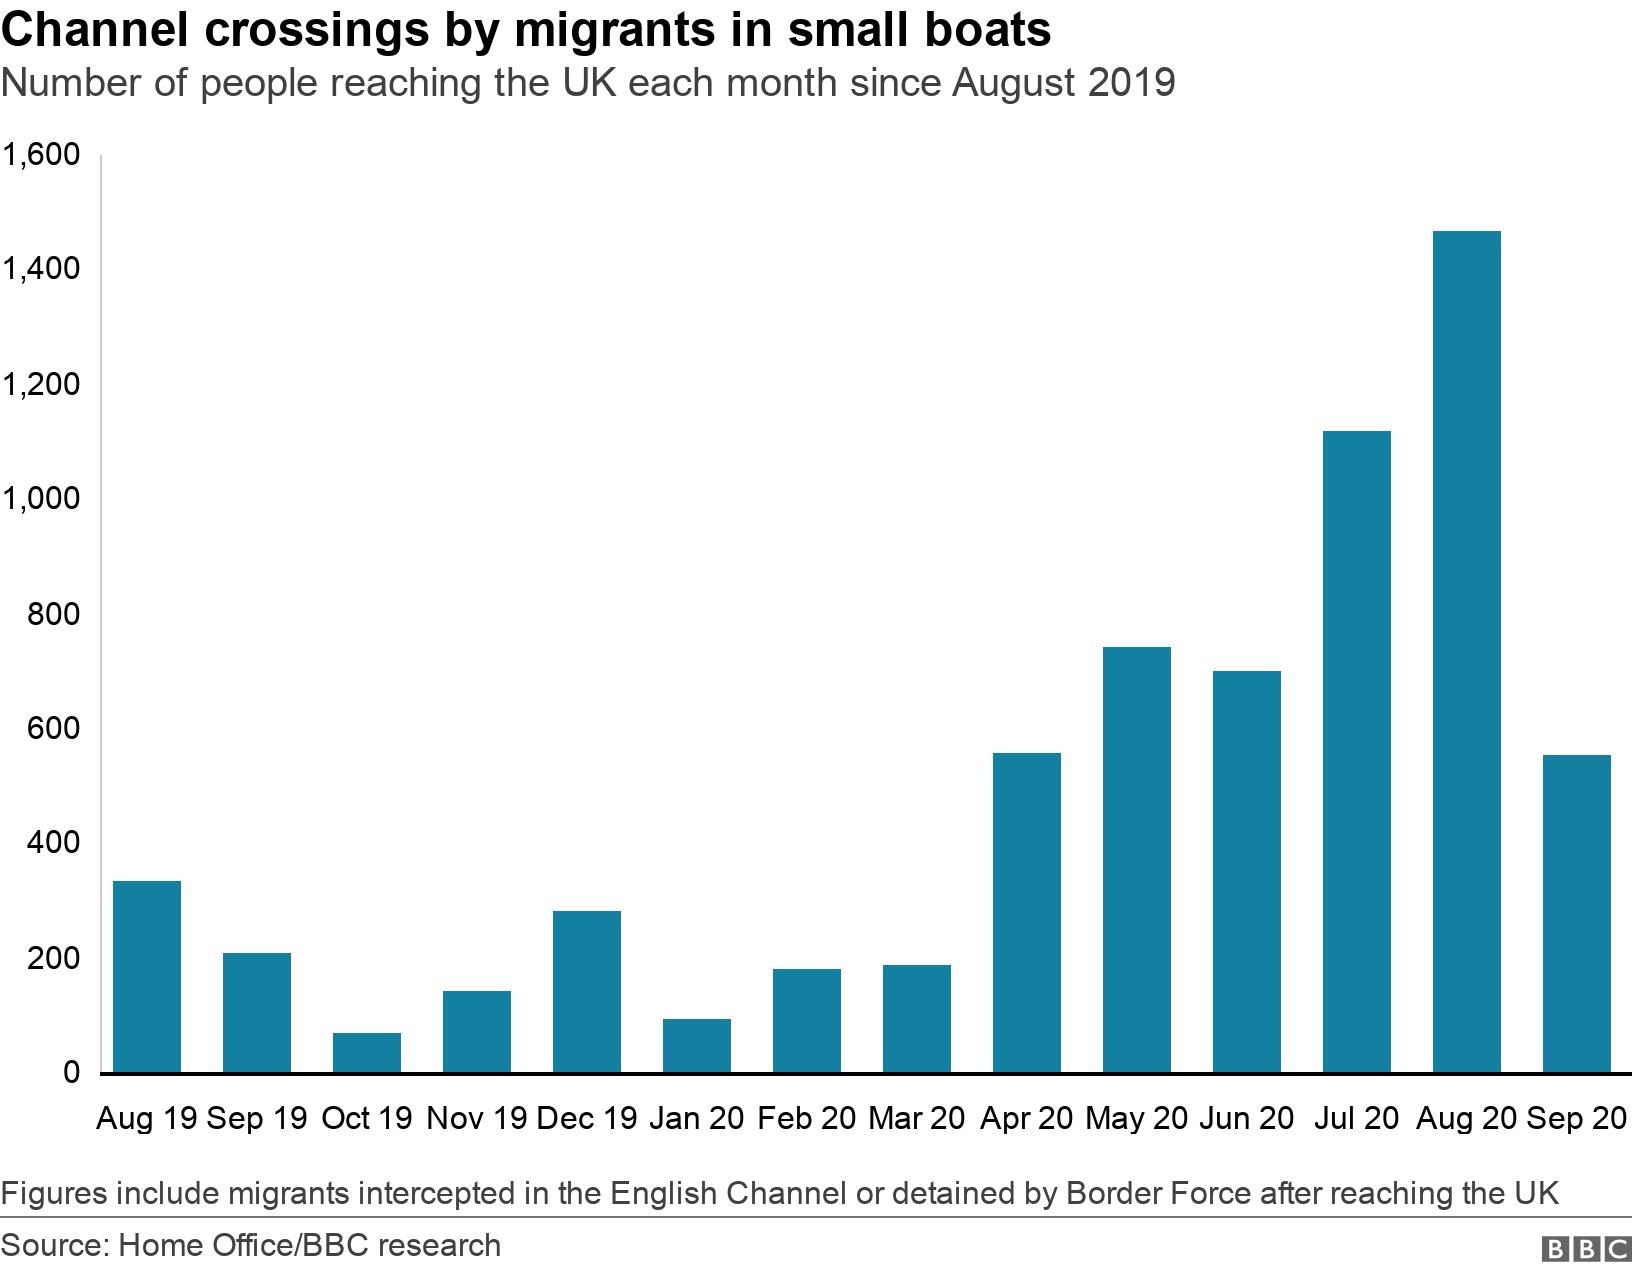 Channel crossings by migrants in small boats. Number of people reaching the UK each month since August 2019.  Figures include migrants intercepted in the English Channel or detained by Border Force after reaching the UK.